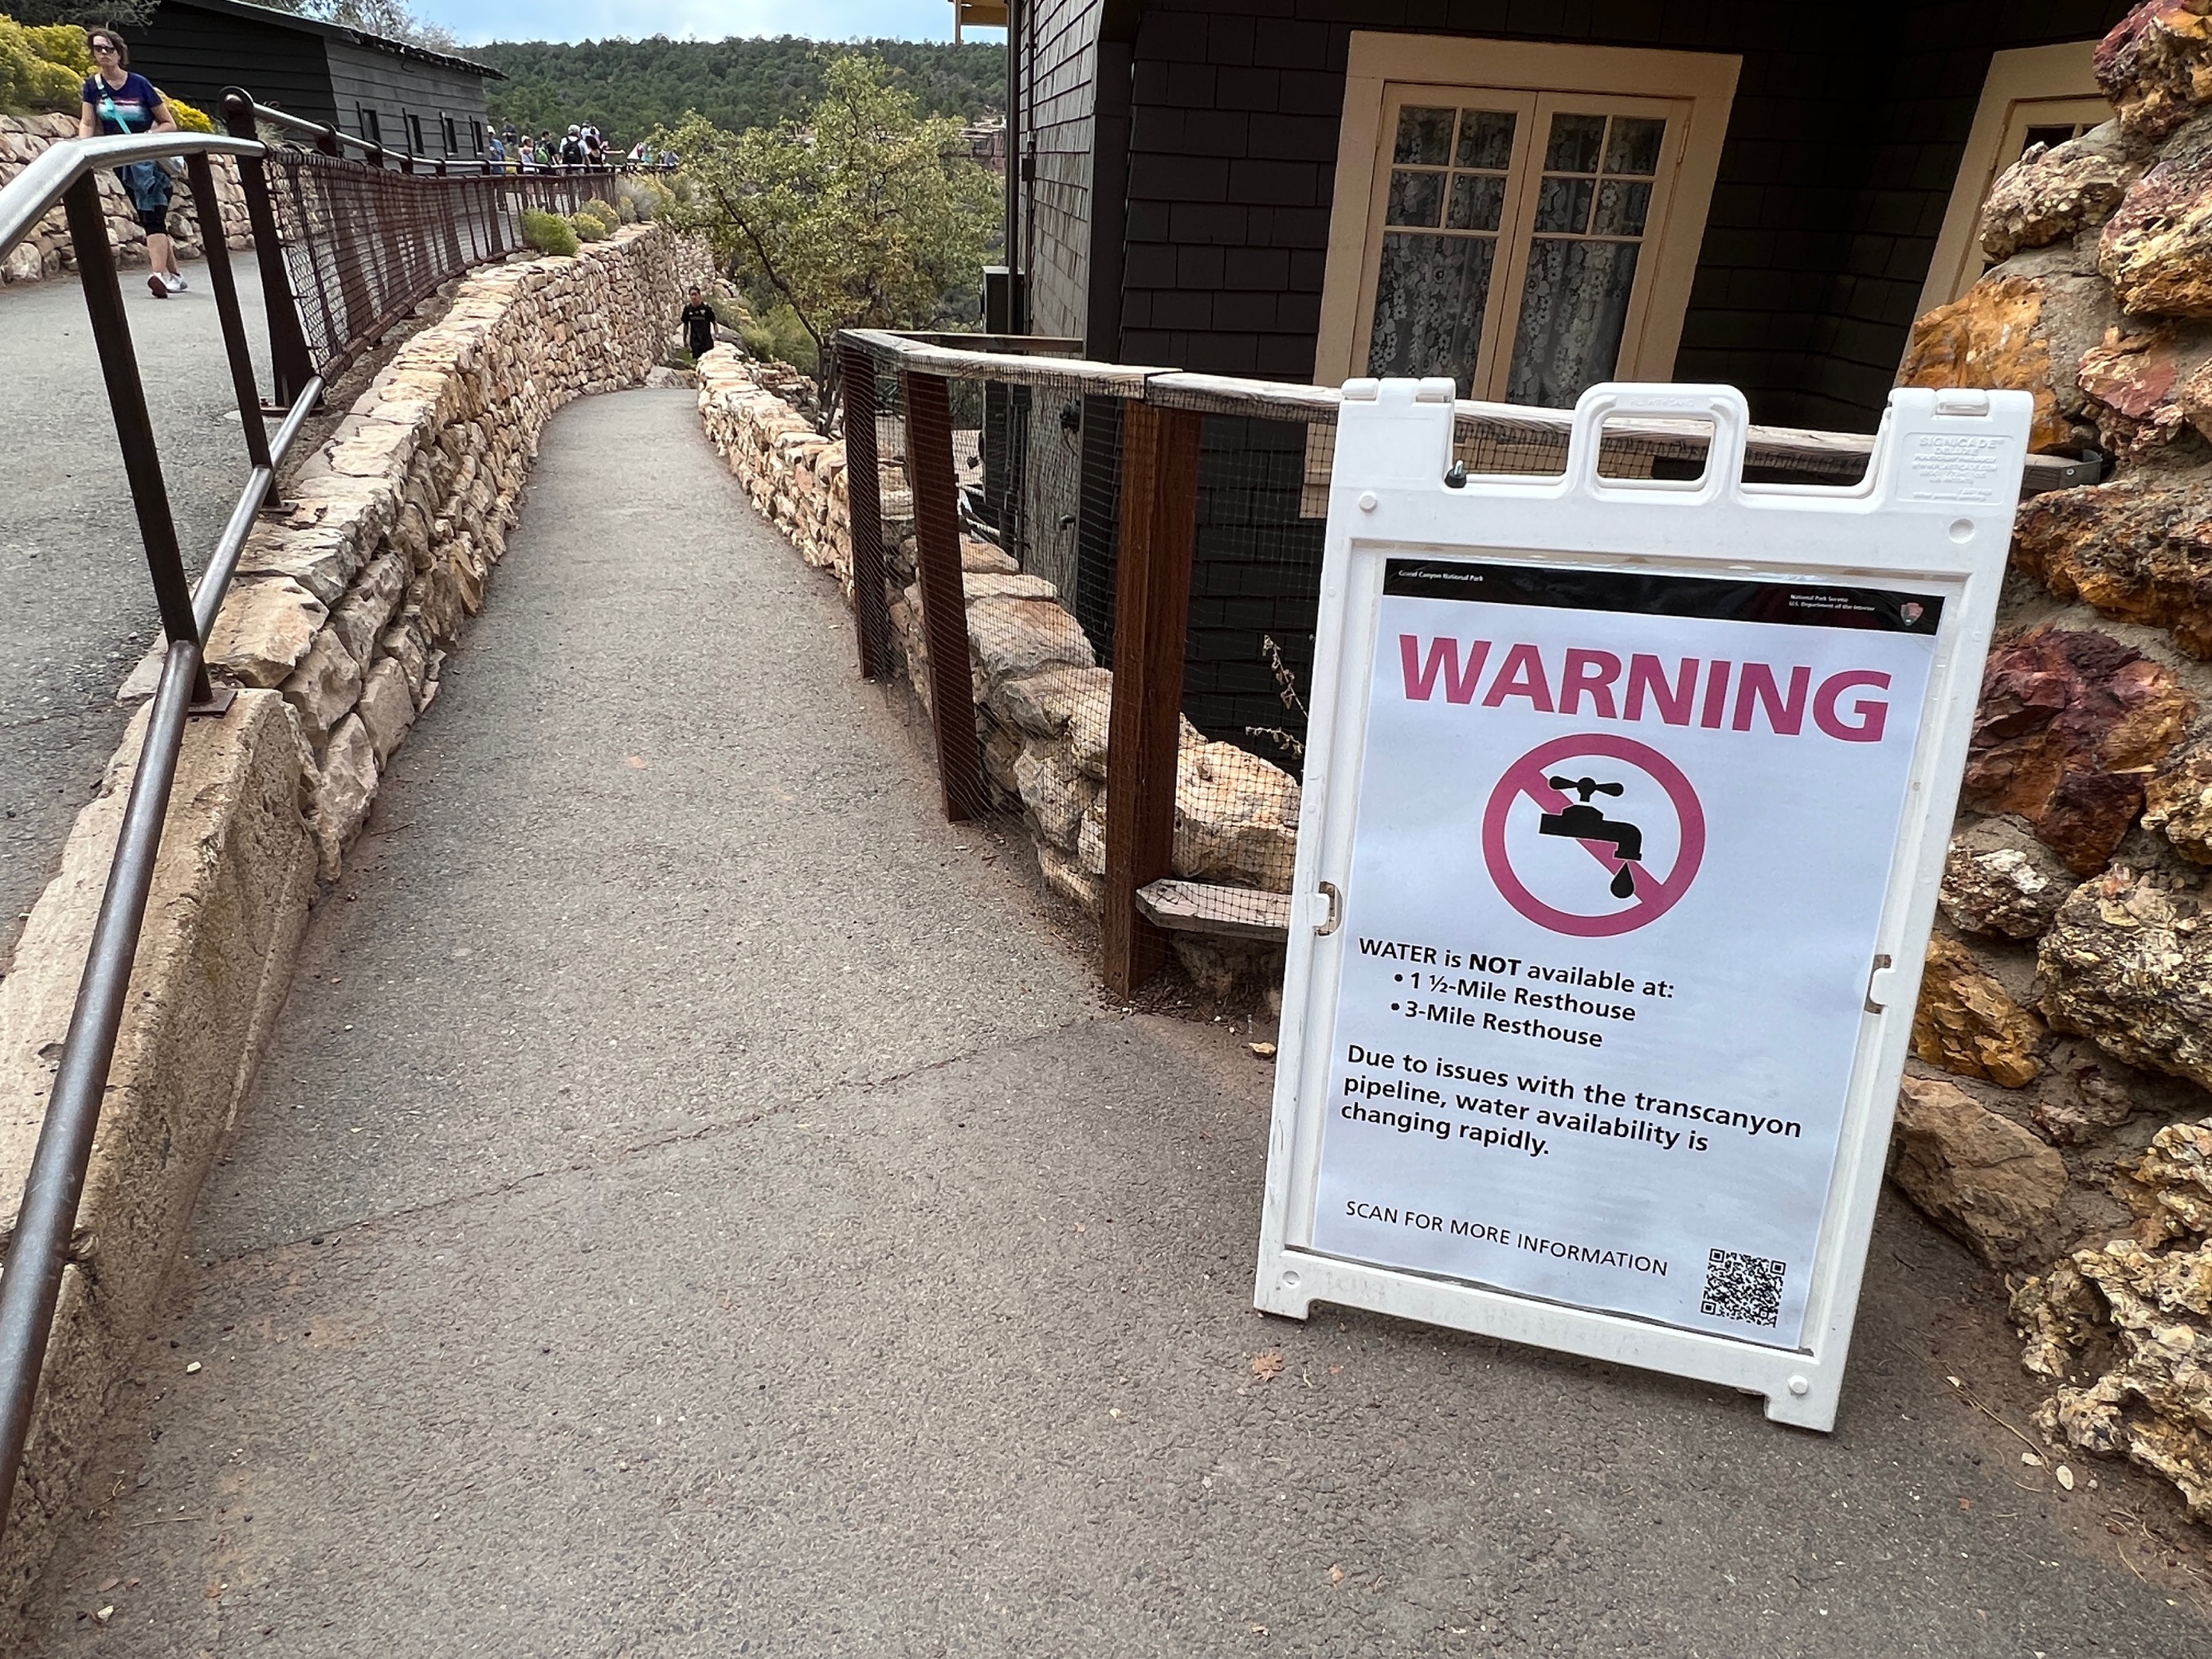 A sign at the beginning of a trail indicates that the water filling stations are turned off at the Mile and a Half and Three Mile Resthouses due to breaks in the transcanyon water pipeline.